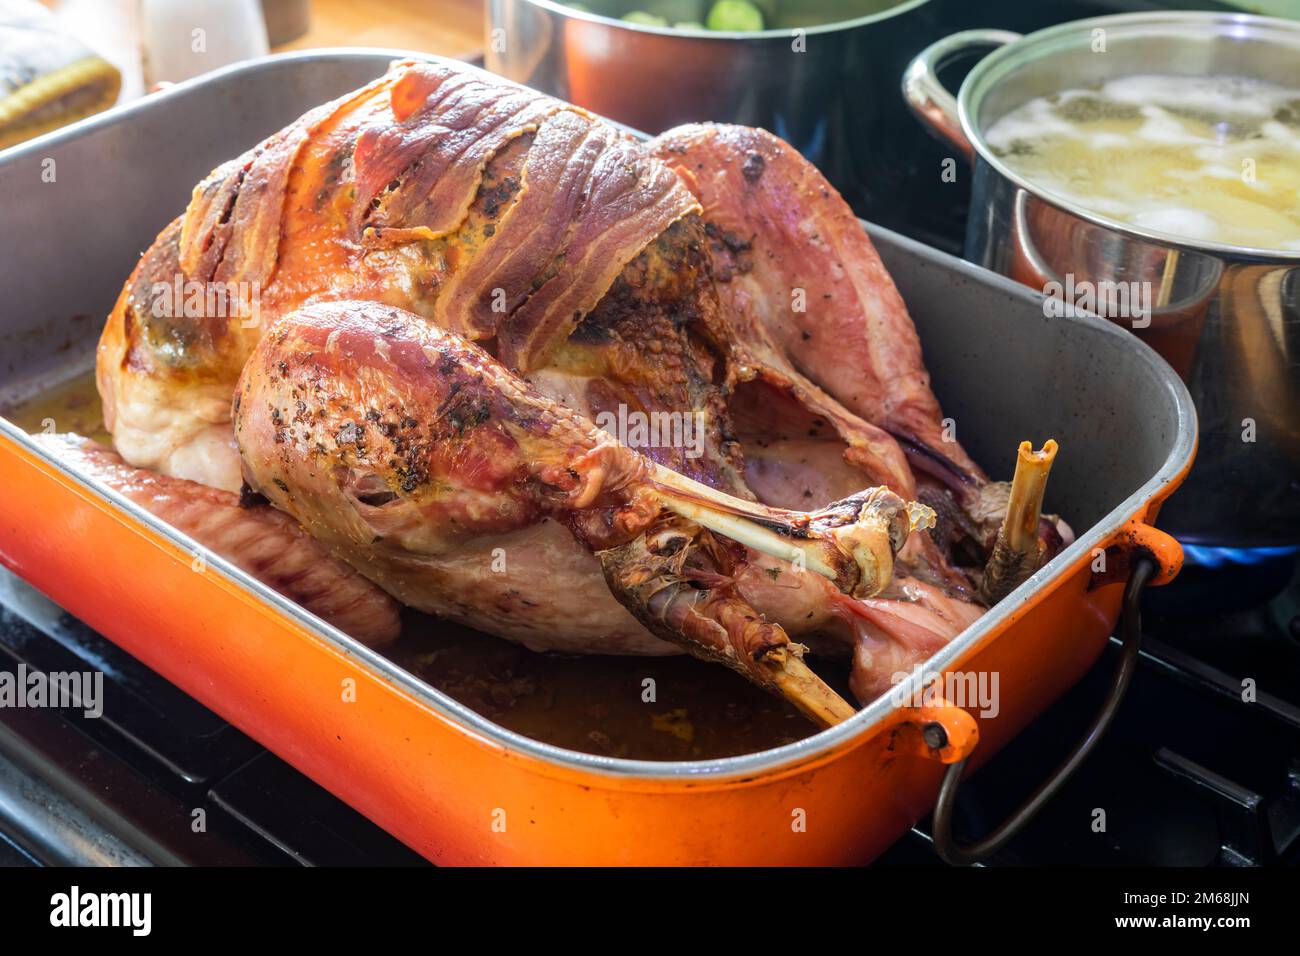 A cooked roast Bronze Turkey topped with streaky bacon rashers, resting on a cooker hob ready to be carved. Stock Photo